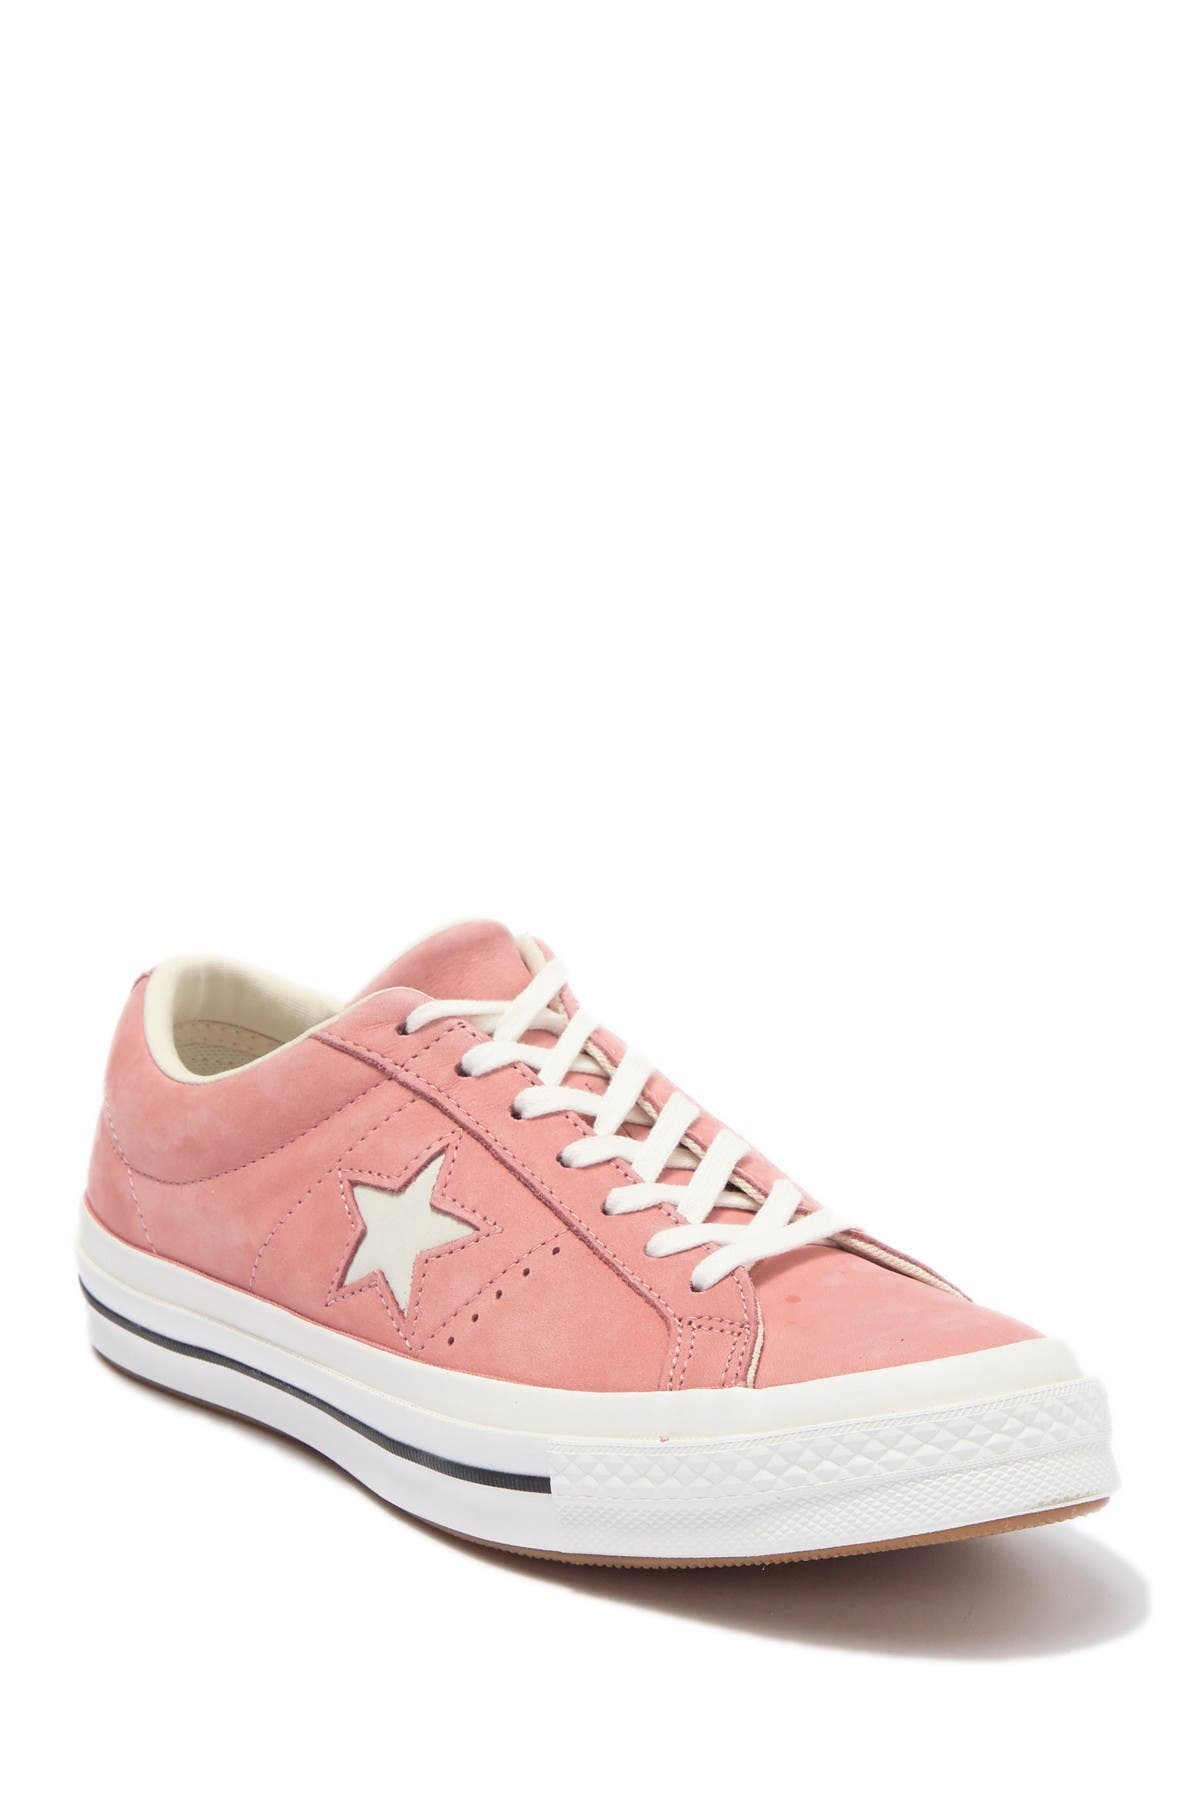 Converse | One Star Oxford Sneaker 